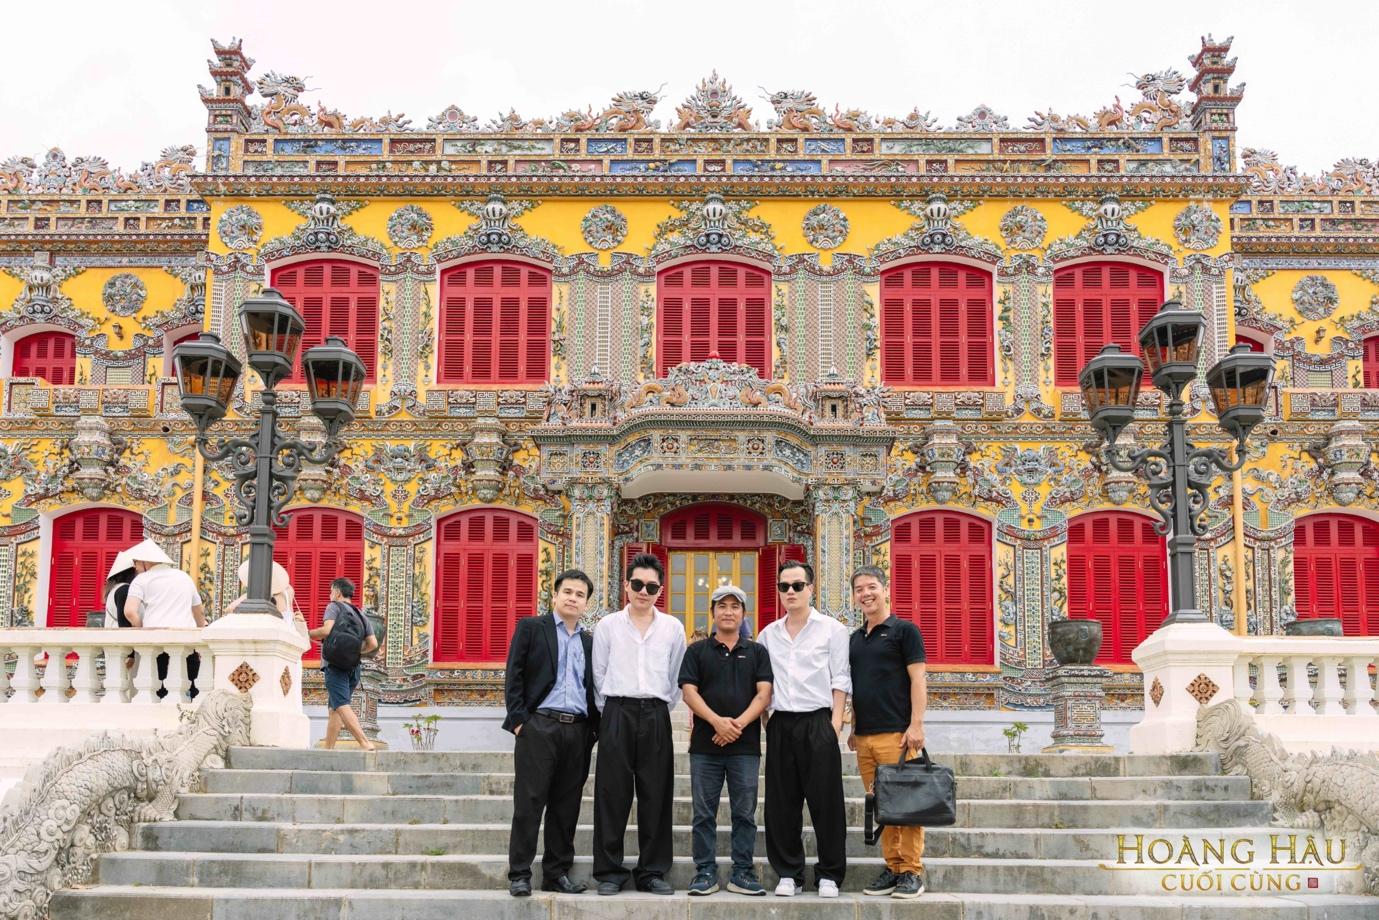 A group of men standing on stairs in front of a colorful building

Description automatically generated